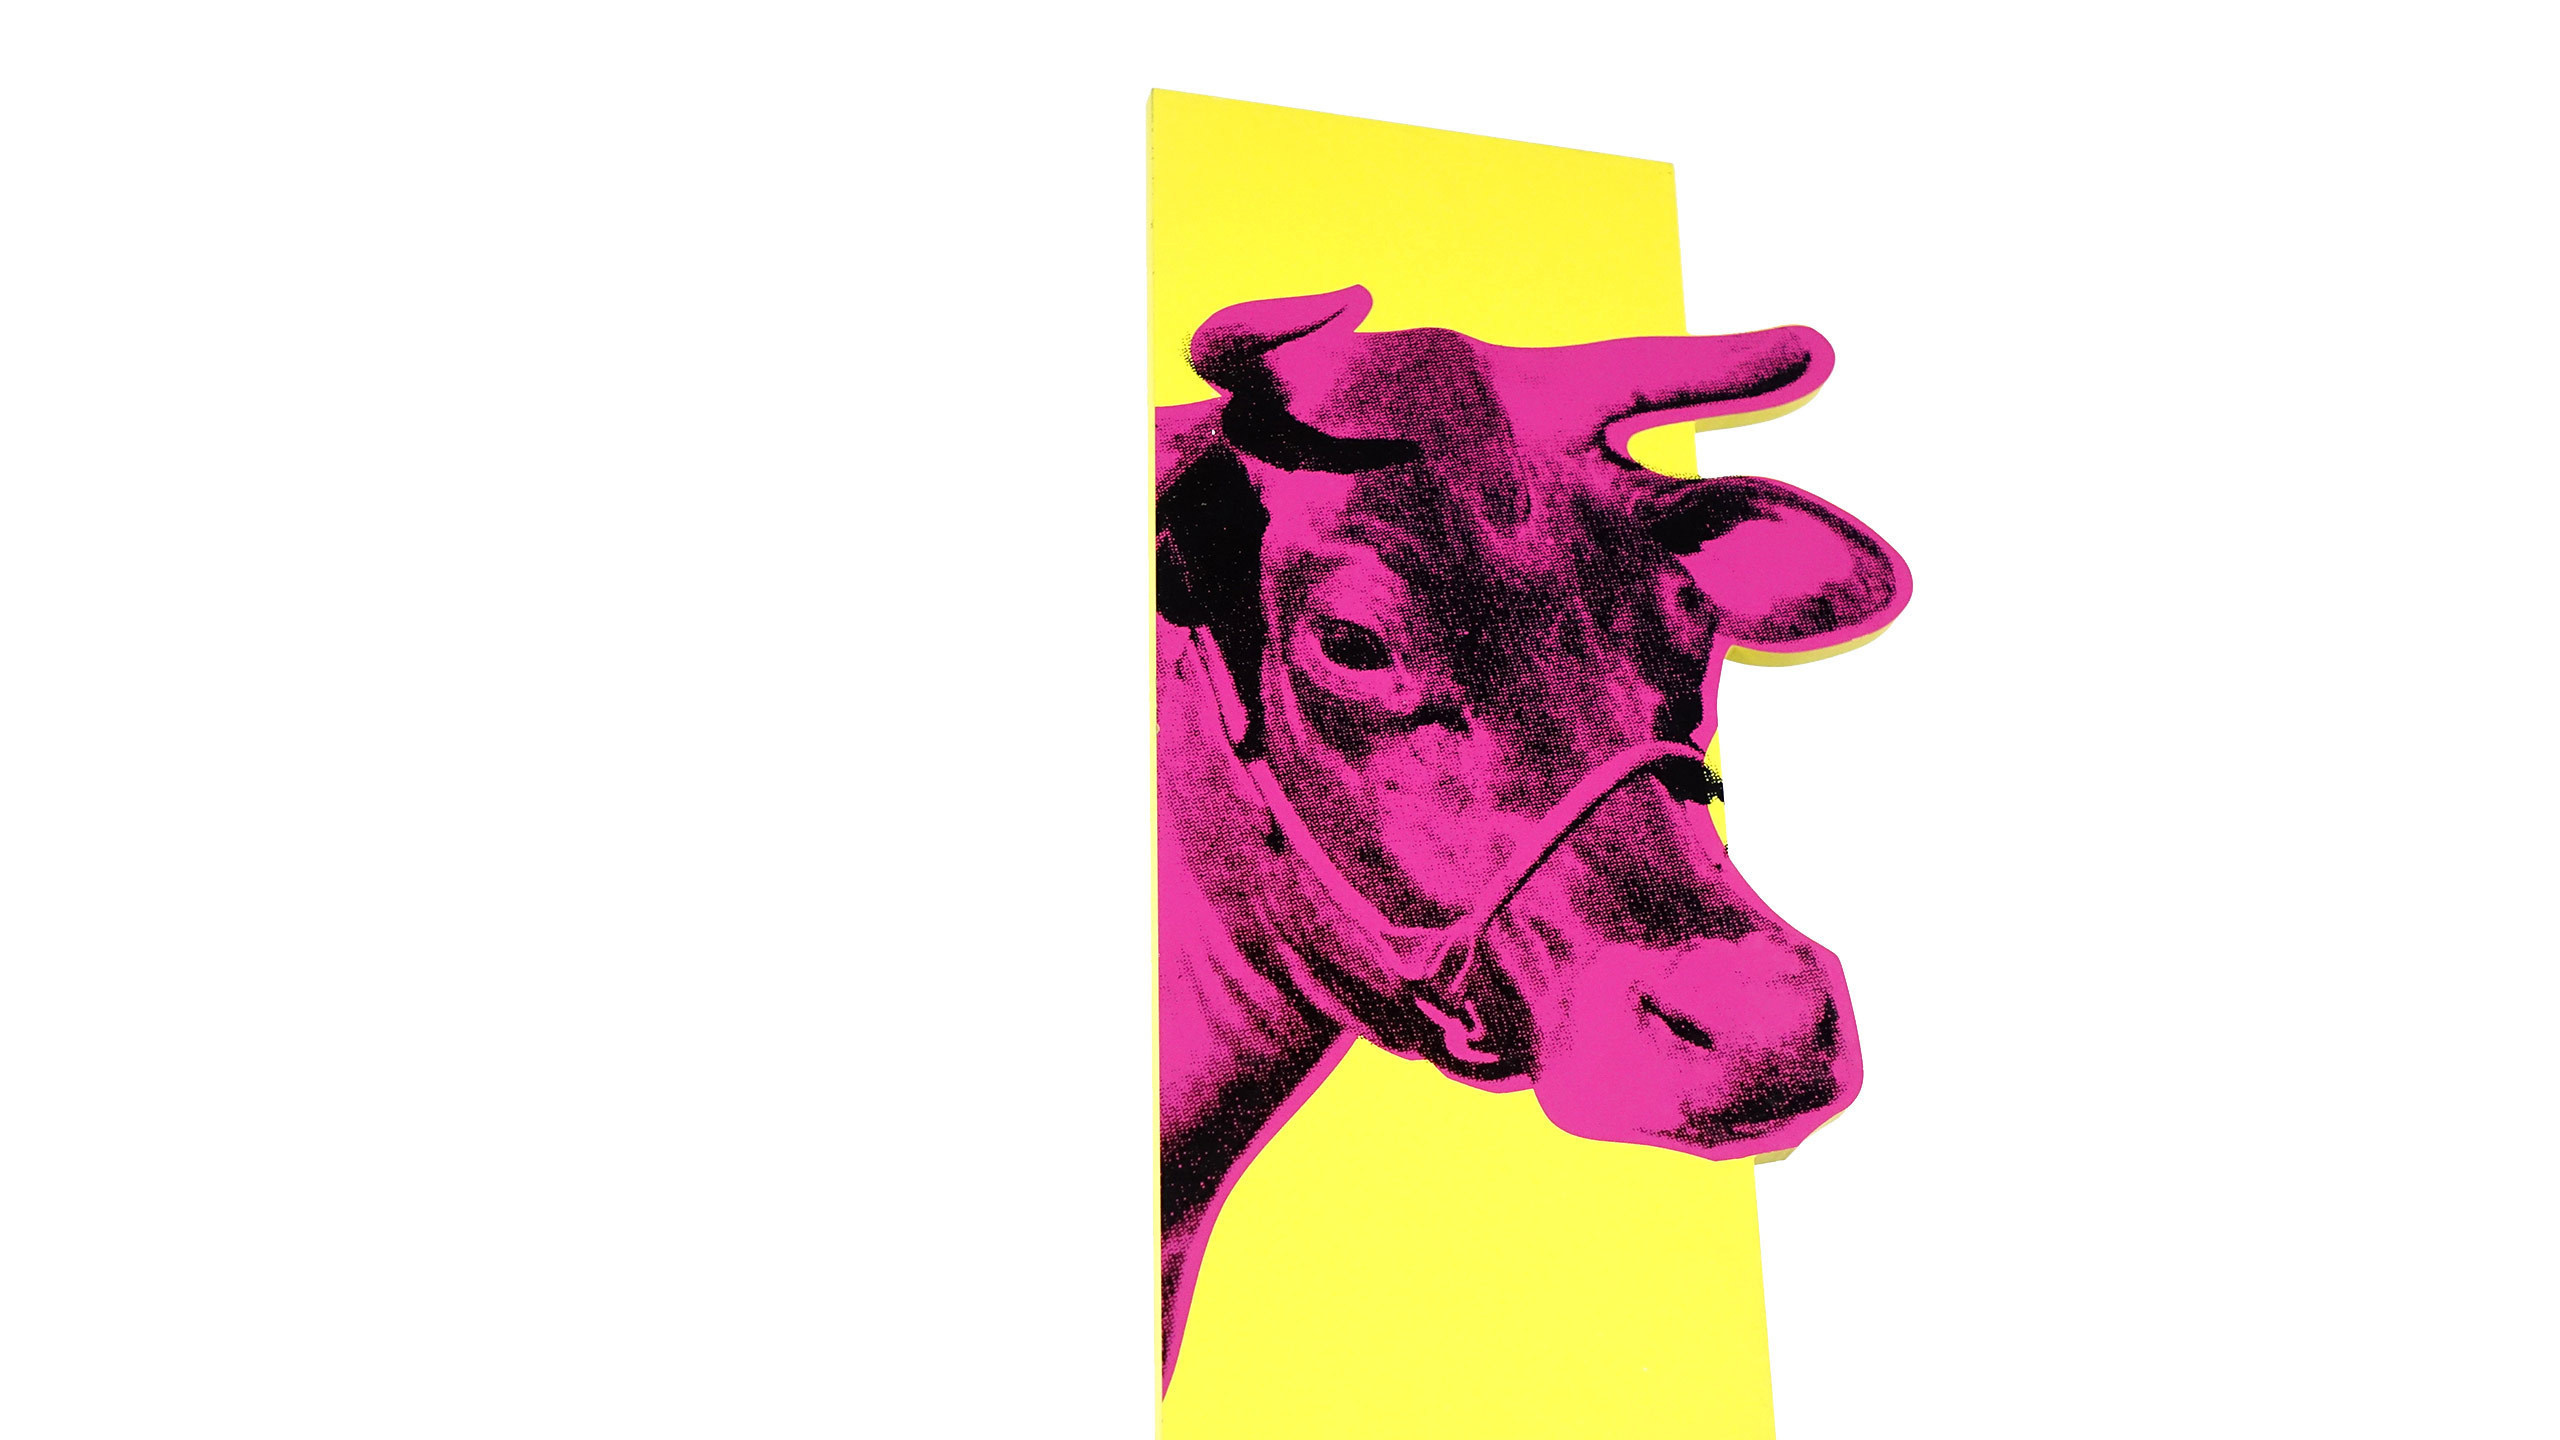 Andy Warhol, Cow wallpaper, Store fronts, Art collection, 2560x1440 HD Desktop